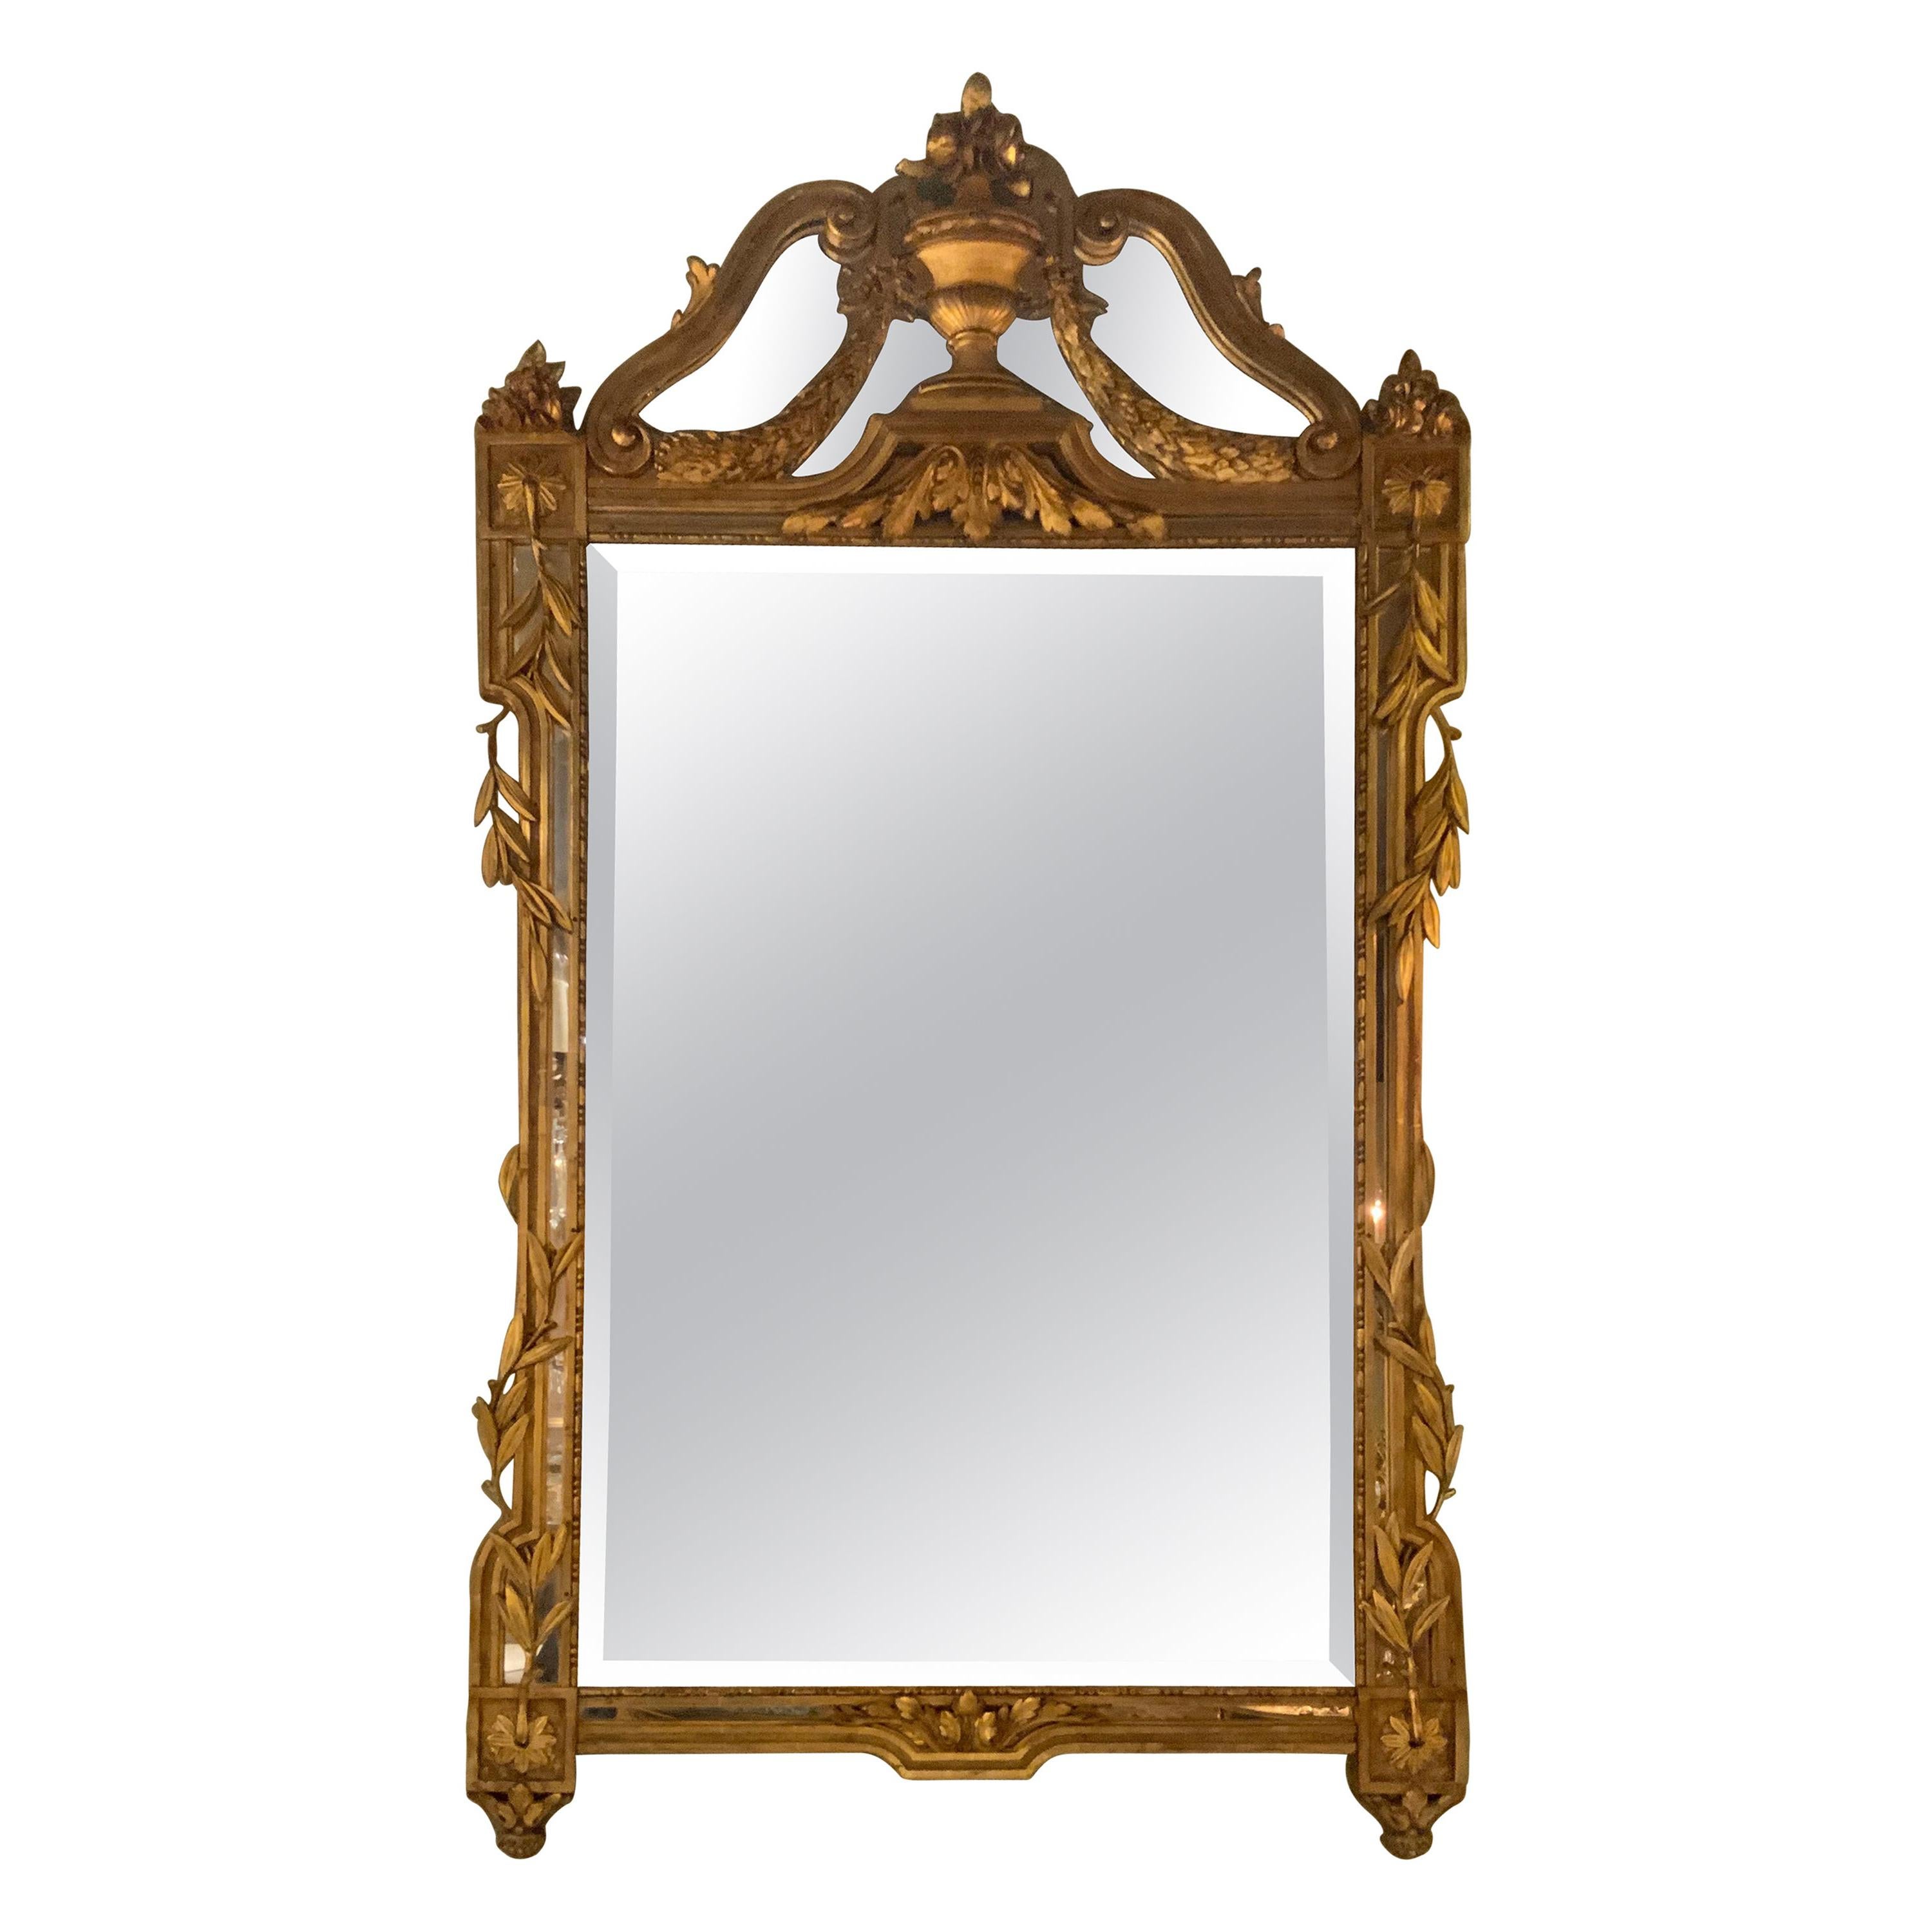 French Giltwood Mirror, 19th C. Beveled with Urn and Foliate Designs For Sale